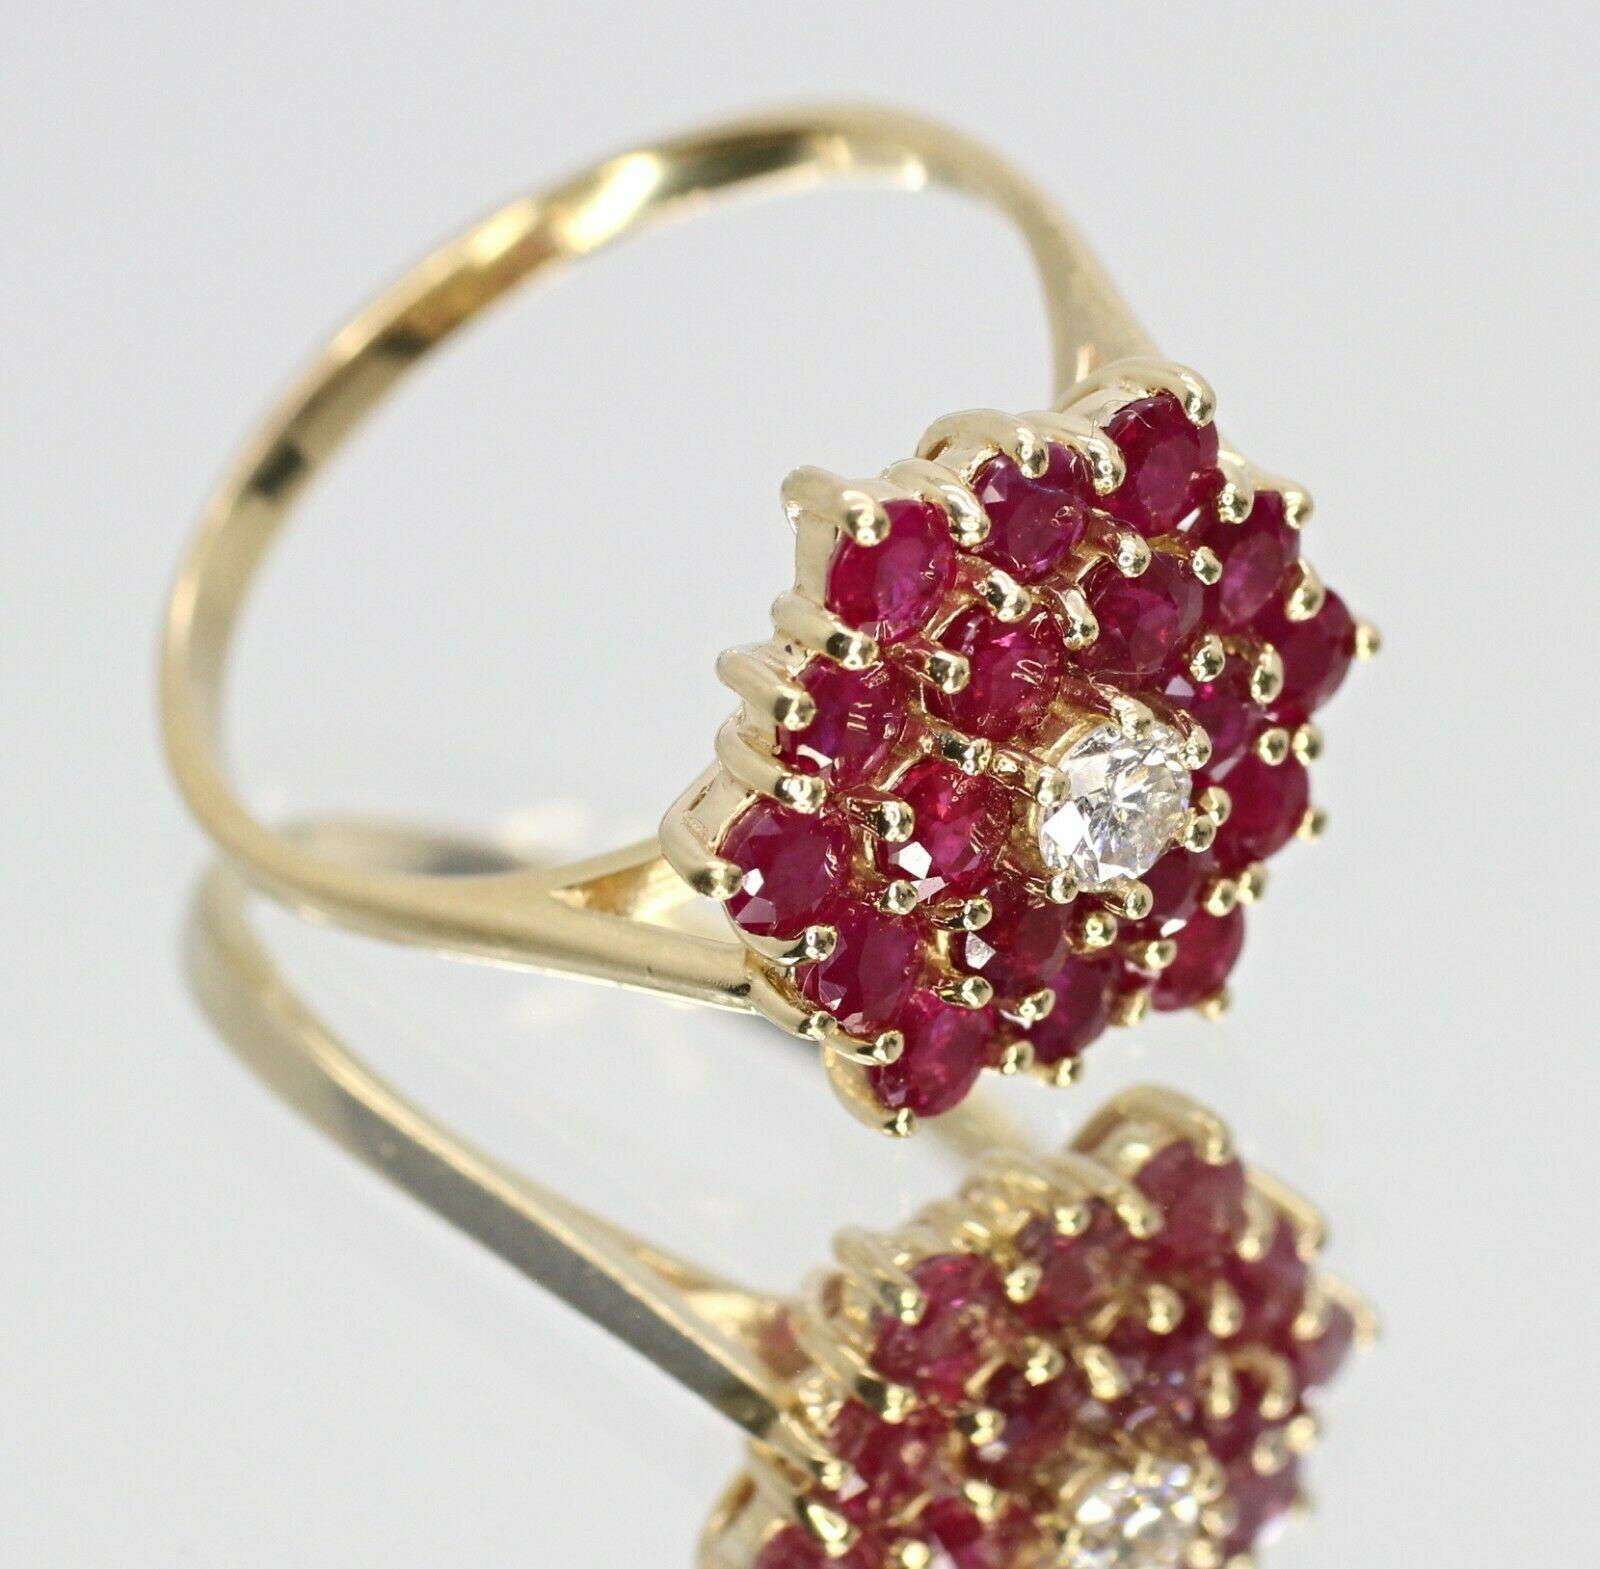 Beautiful vintage BH EFFY cluster ring. This ring features a one piece round cut diamond in approximately 0.15 carat, G color and Vs in stone clarity with 18 pcs round cut Ruby gemstone in 3.3mm. The current size of the ring is 10.25US.
